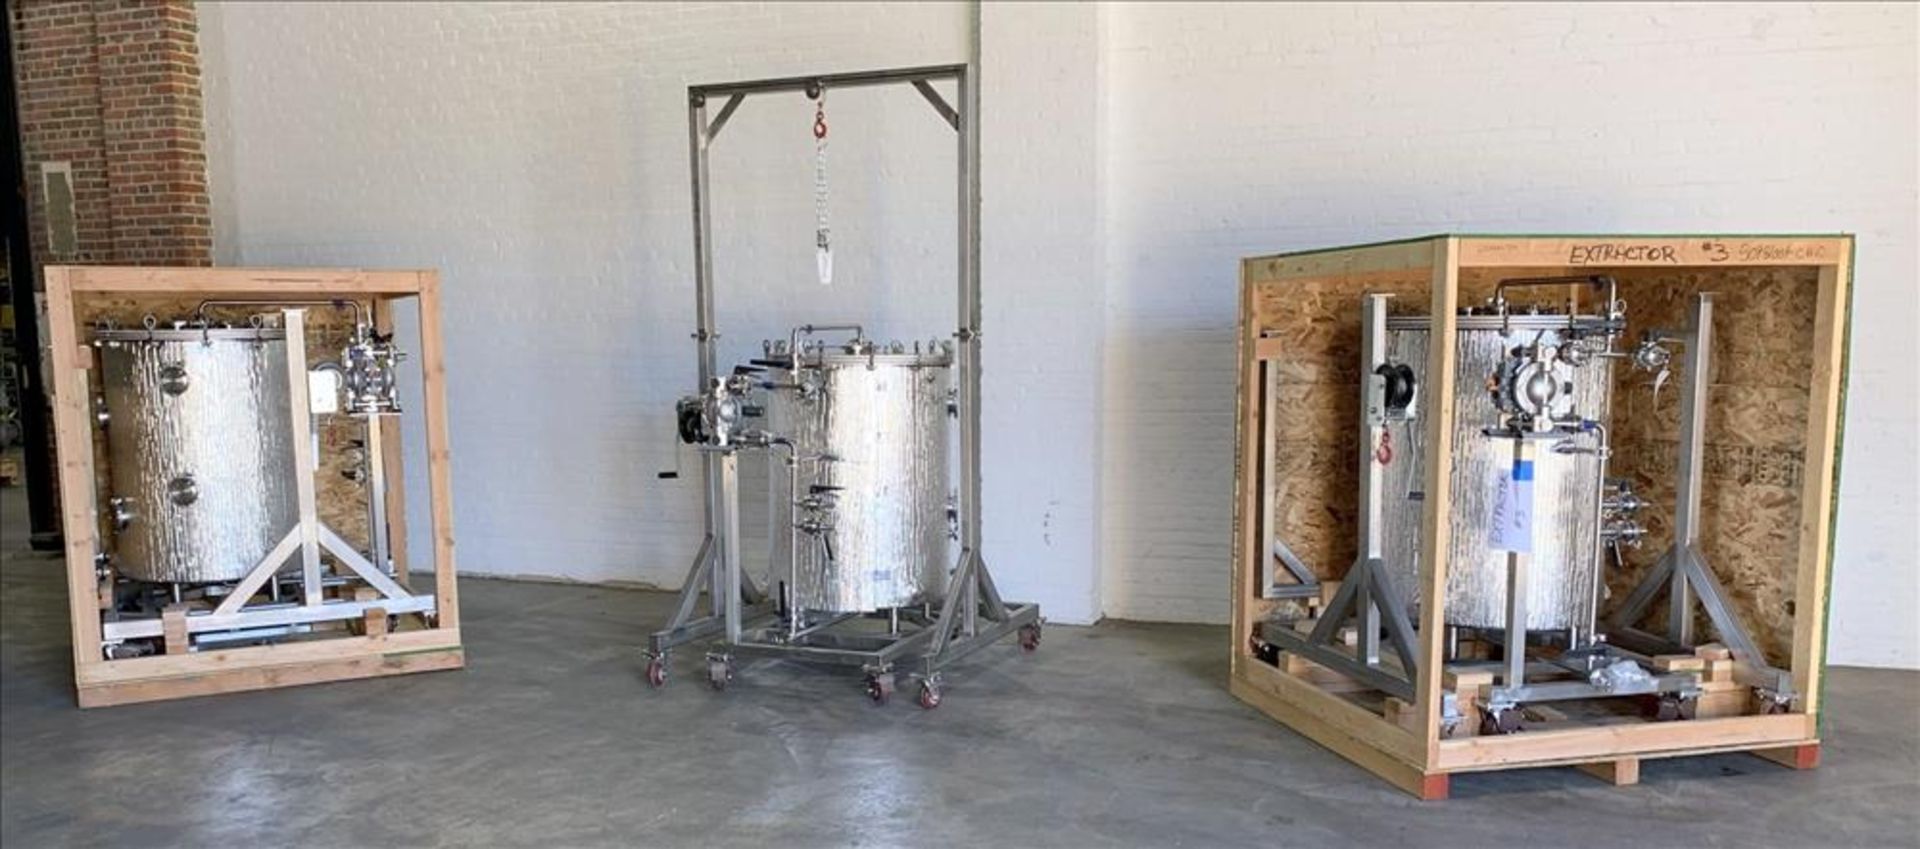 New In Crates - Eden Labs LLC Industrial 500 Gallon Performance Solvent Recovery System - Image 50 of 152